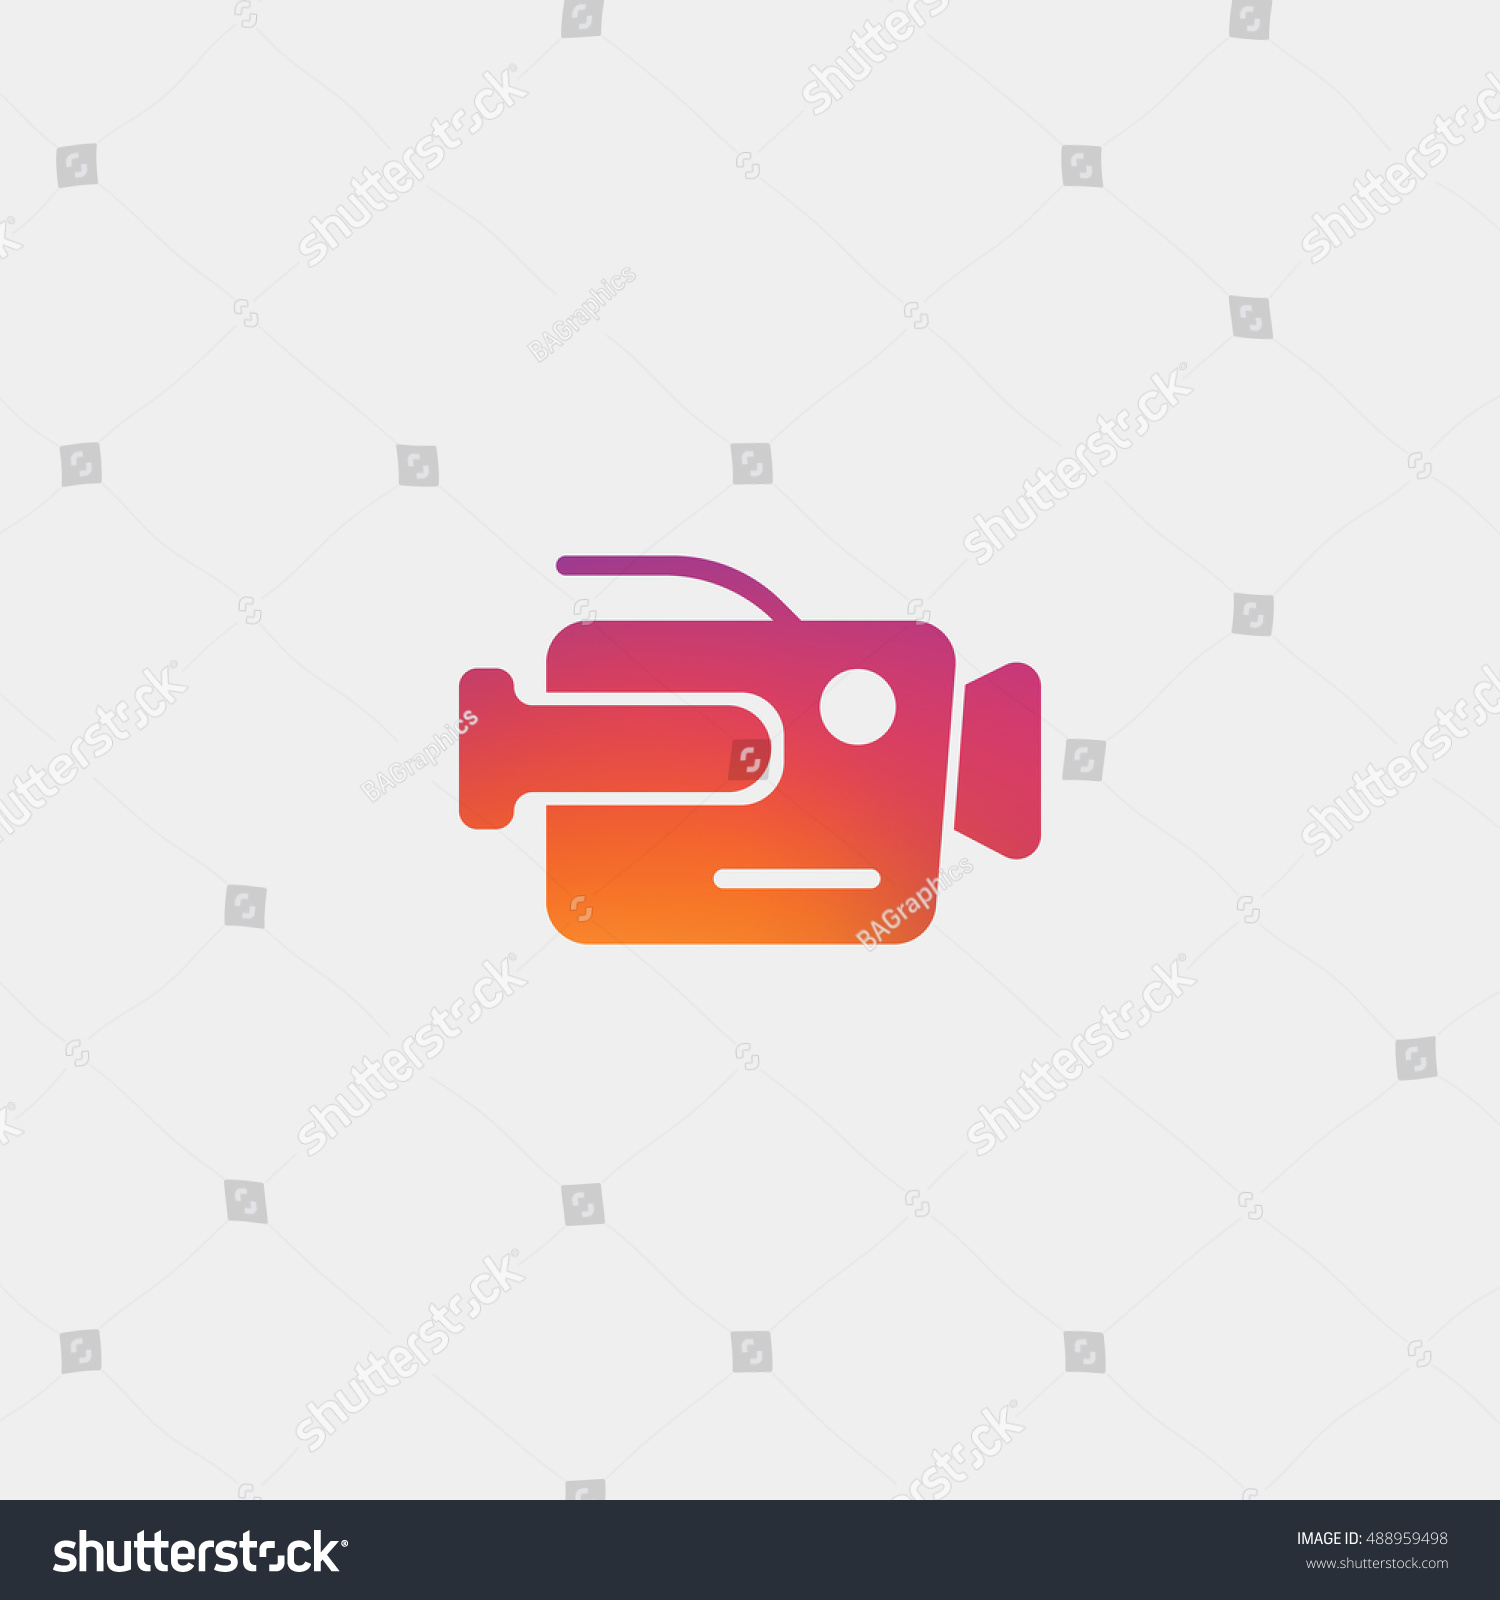 SVG of Camera icon vector, clip art. Also useful as logo, web element, symbol, graphic image, silhouette and illustration. Compatible with ai, cdr, jpg, png, svg, pdf, ico and eps. svg